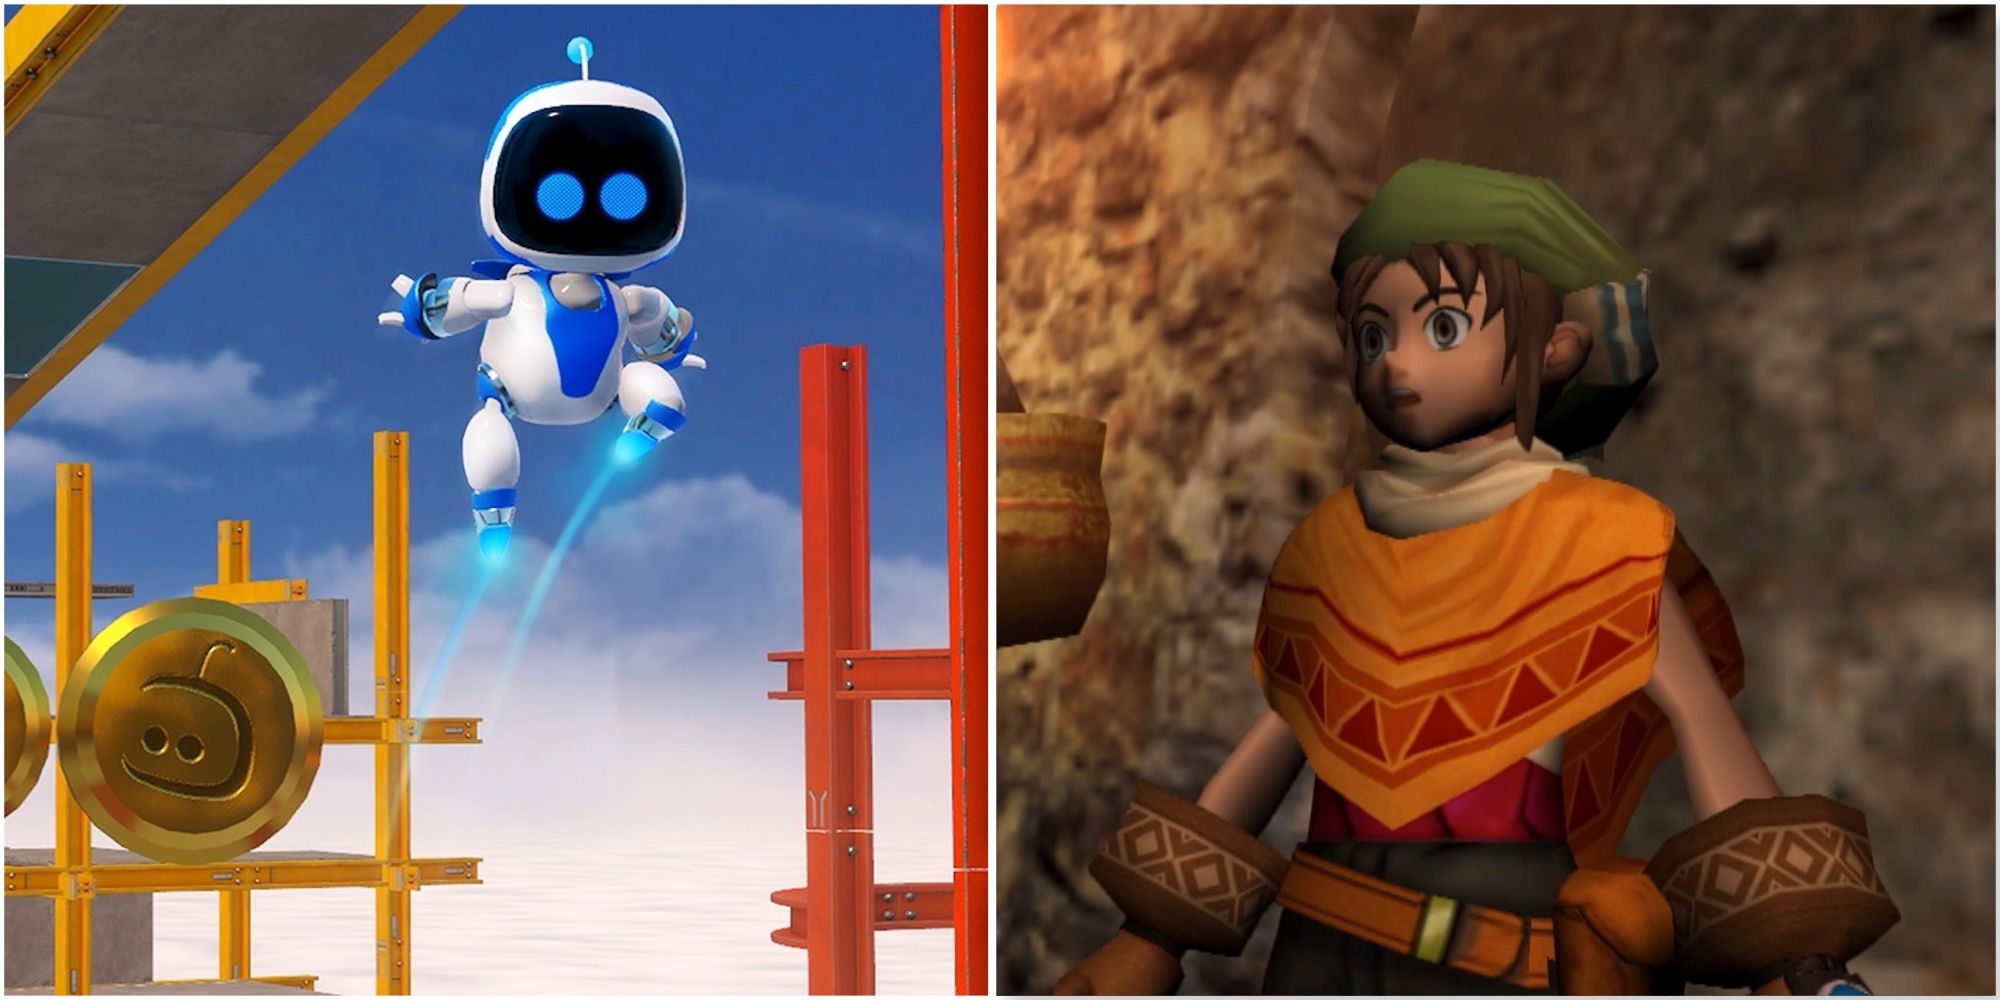 Exploring a level in Astro Bot Rescue Mission and Toan in Dark Cloud 1